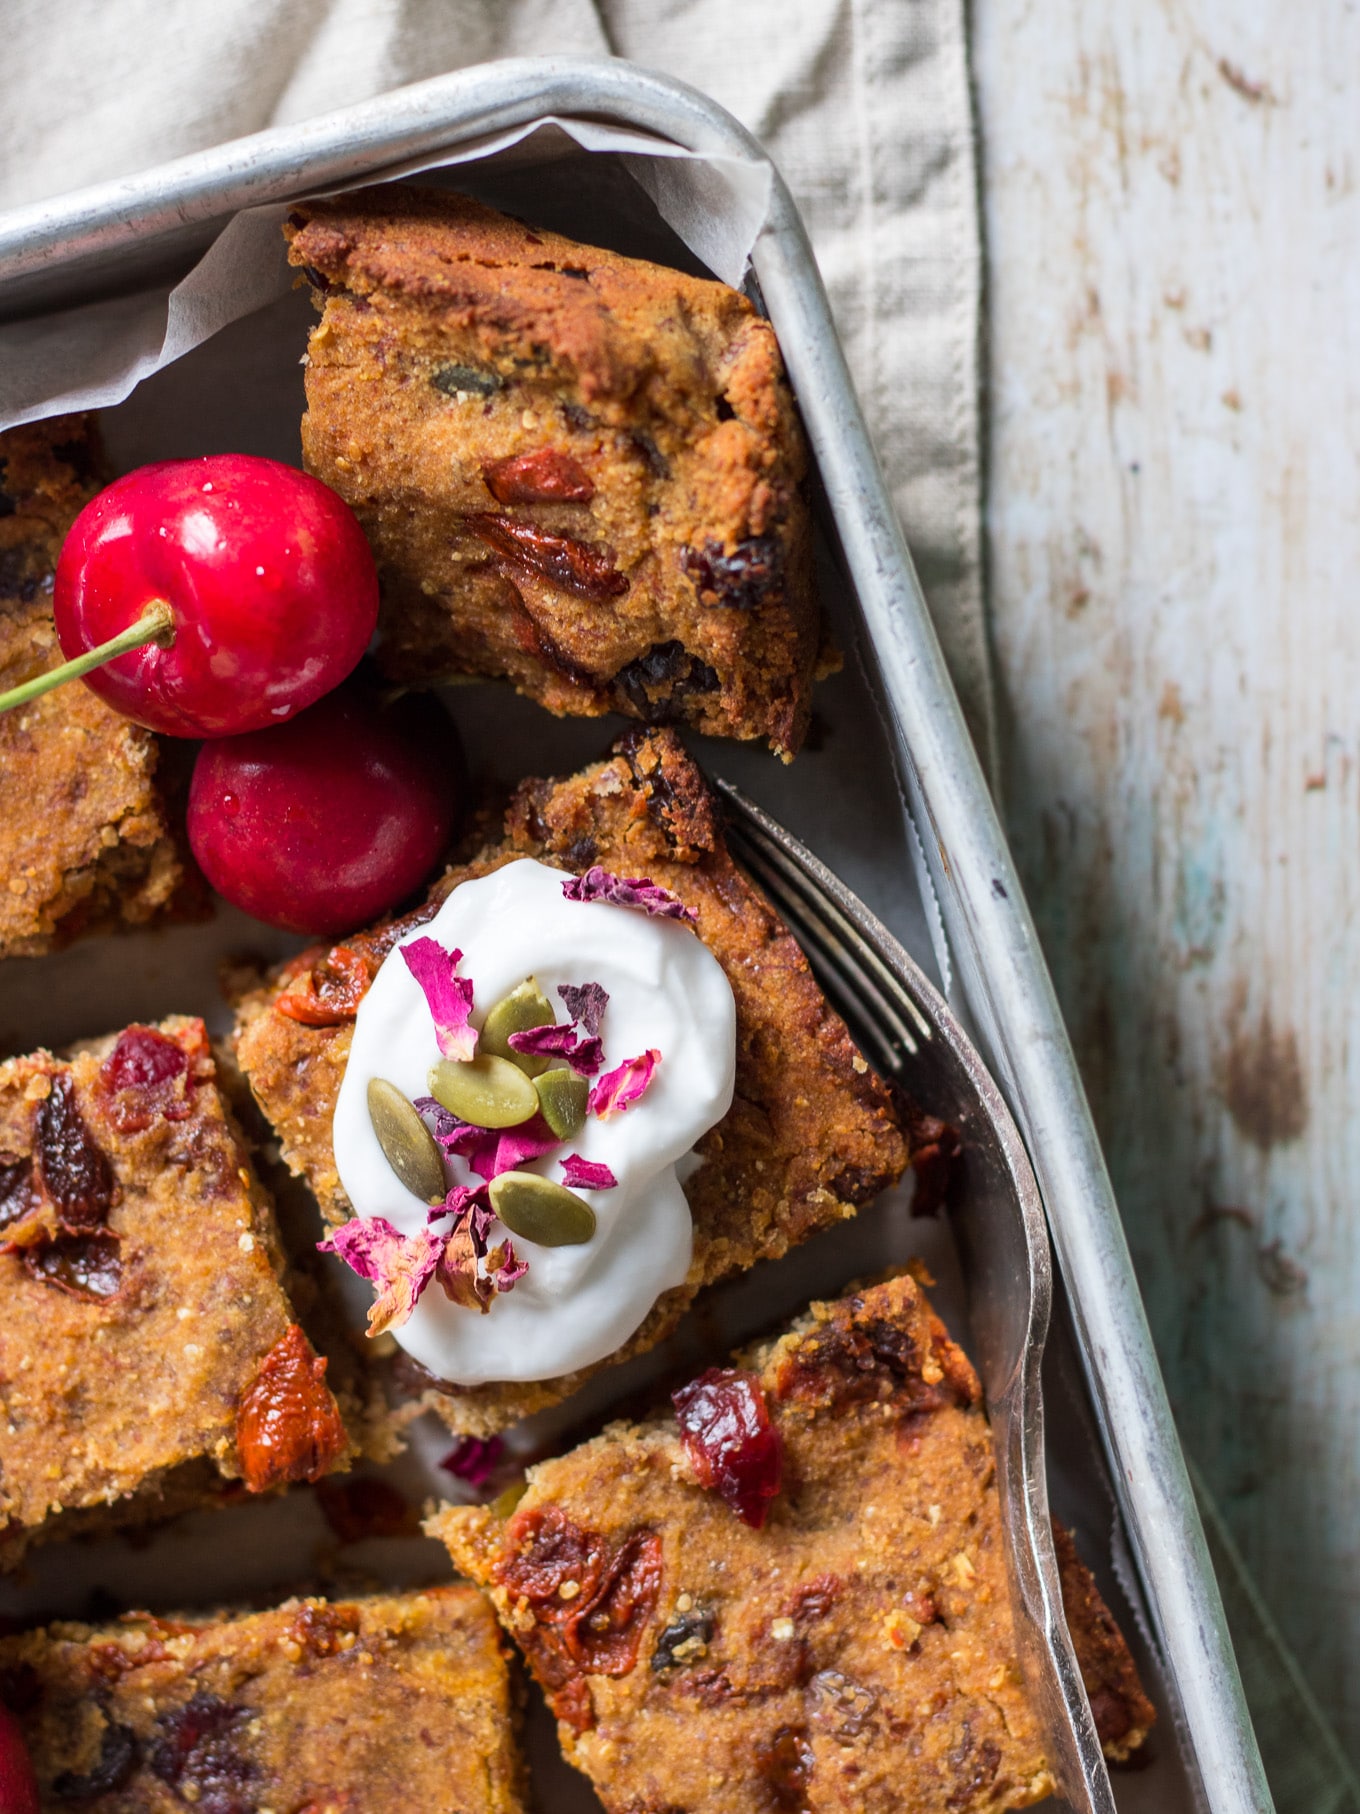 Nut Free Vegan Fruit Slice is made with coconut flour, brown rice flour, banana and tahini. Studded with loads of dried fruit. A healthier sweet treat! #fruitslice #vegan #glutenfree